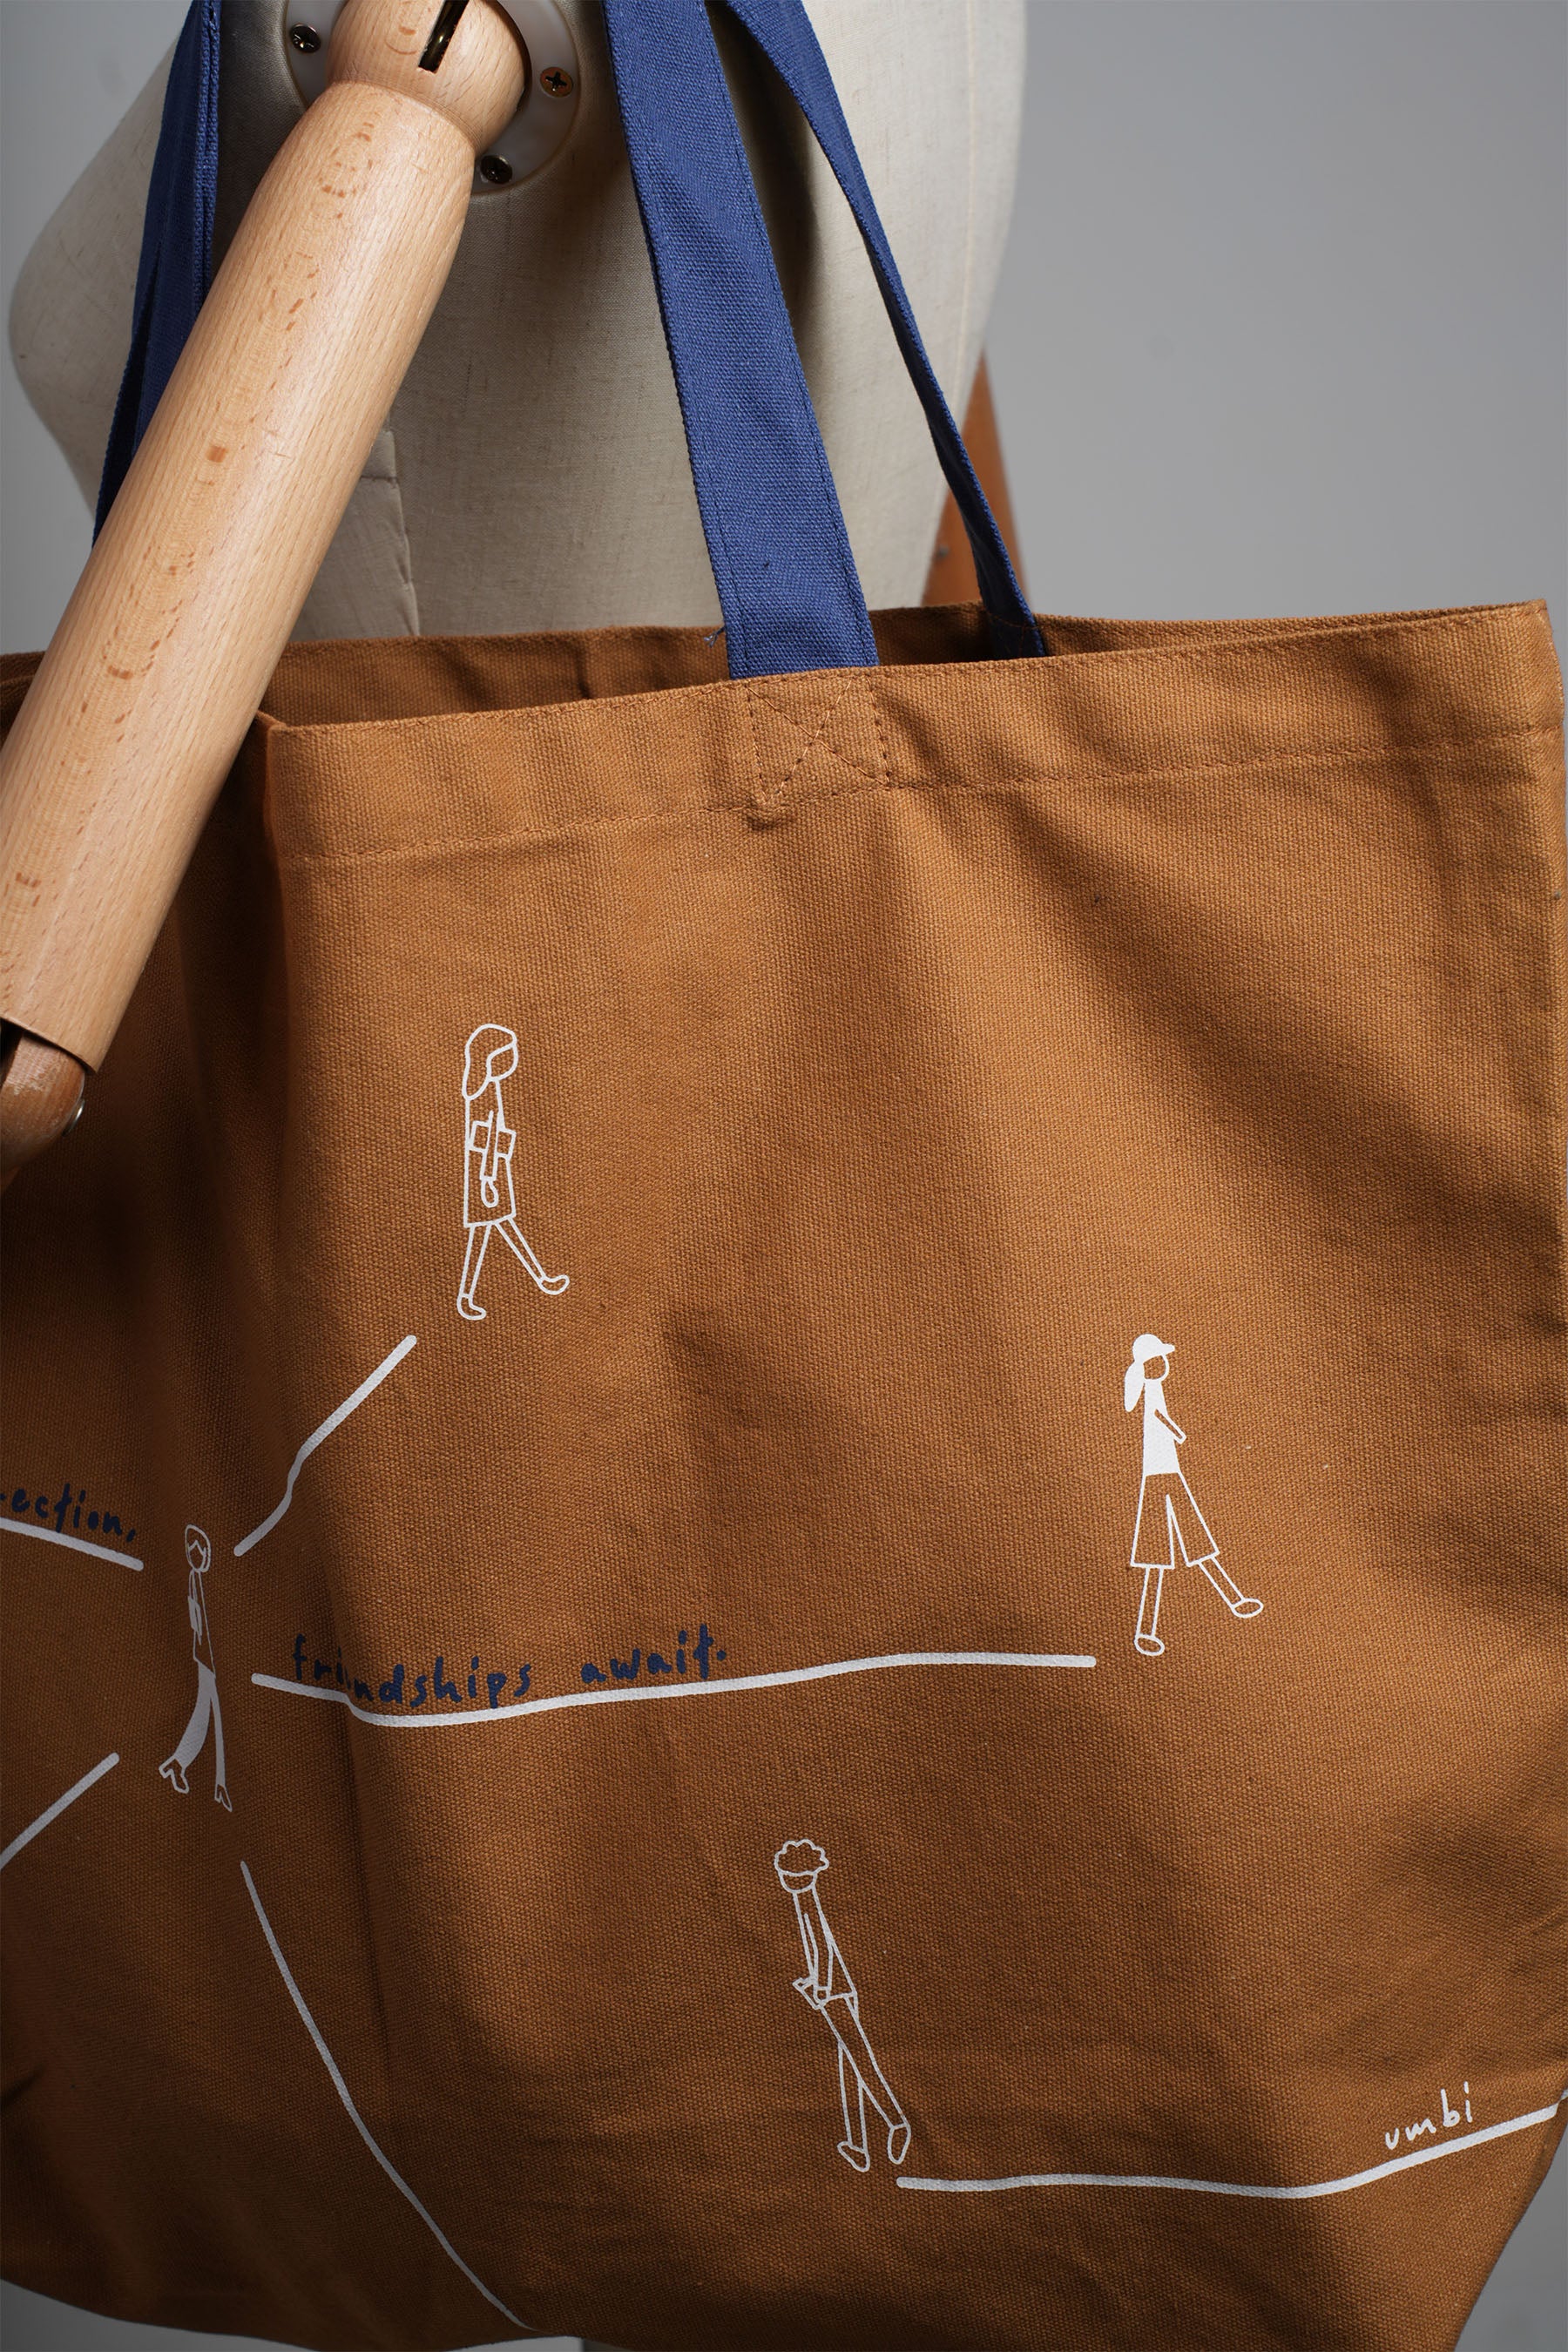 Extra Large Tote Bag (Pathway to Friendship VERSION)